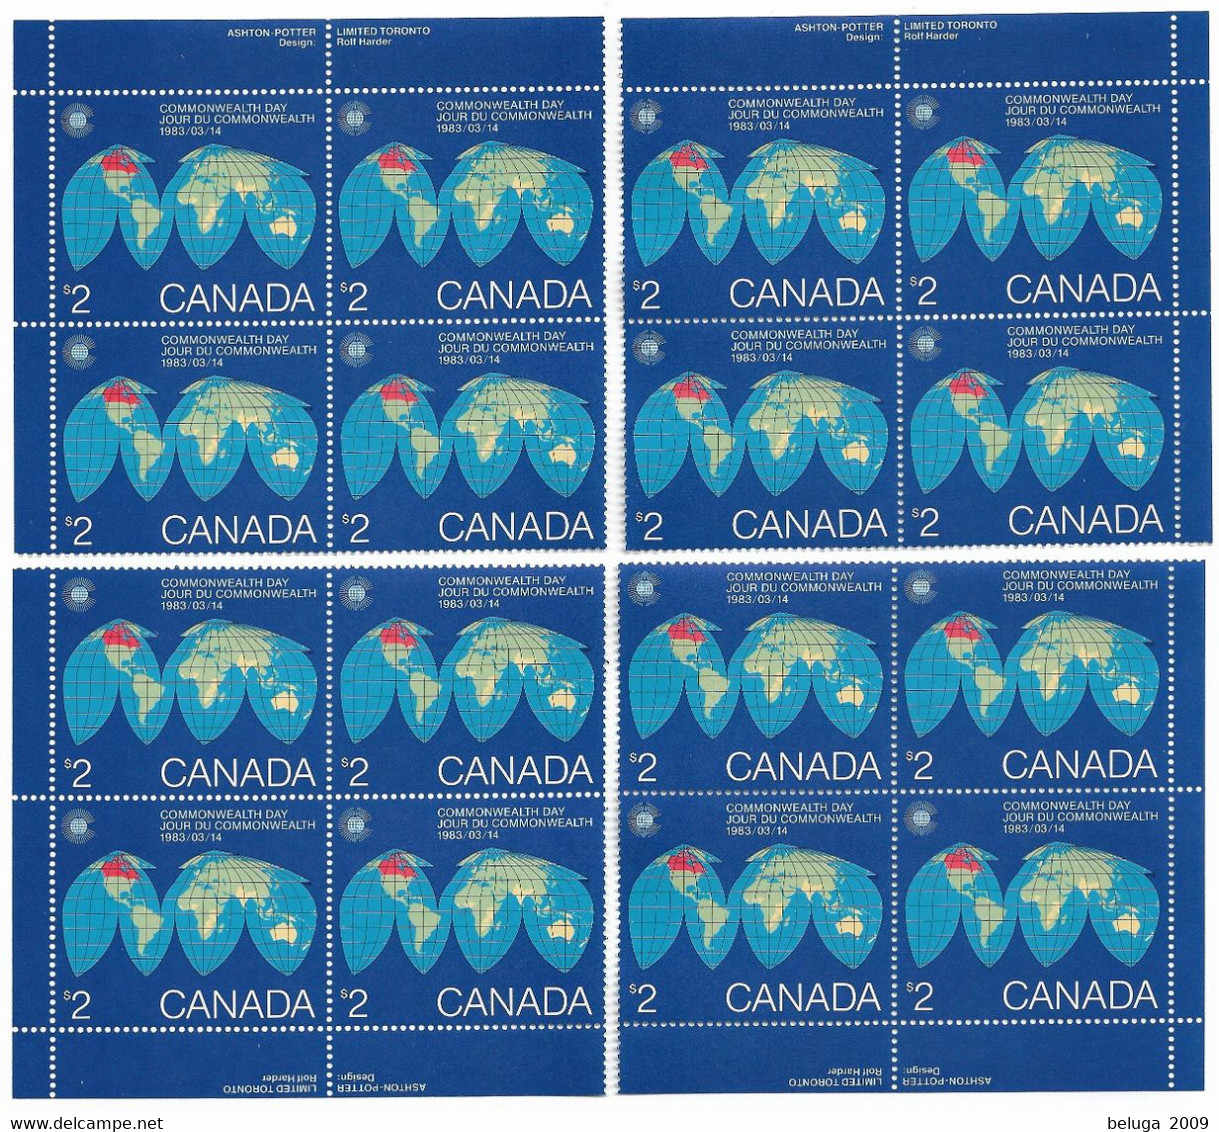 Canada 1983 #977 $2 Commonwealth Day - Map Of Earth 4 Corner Blocks MNH Cat $250 - Feuilles Complètes Et Multiples